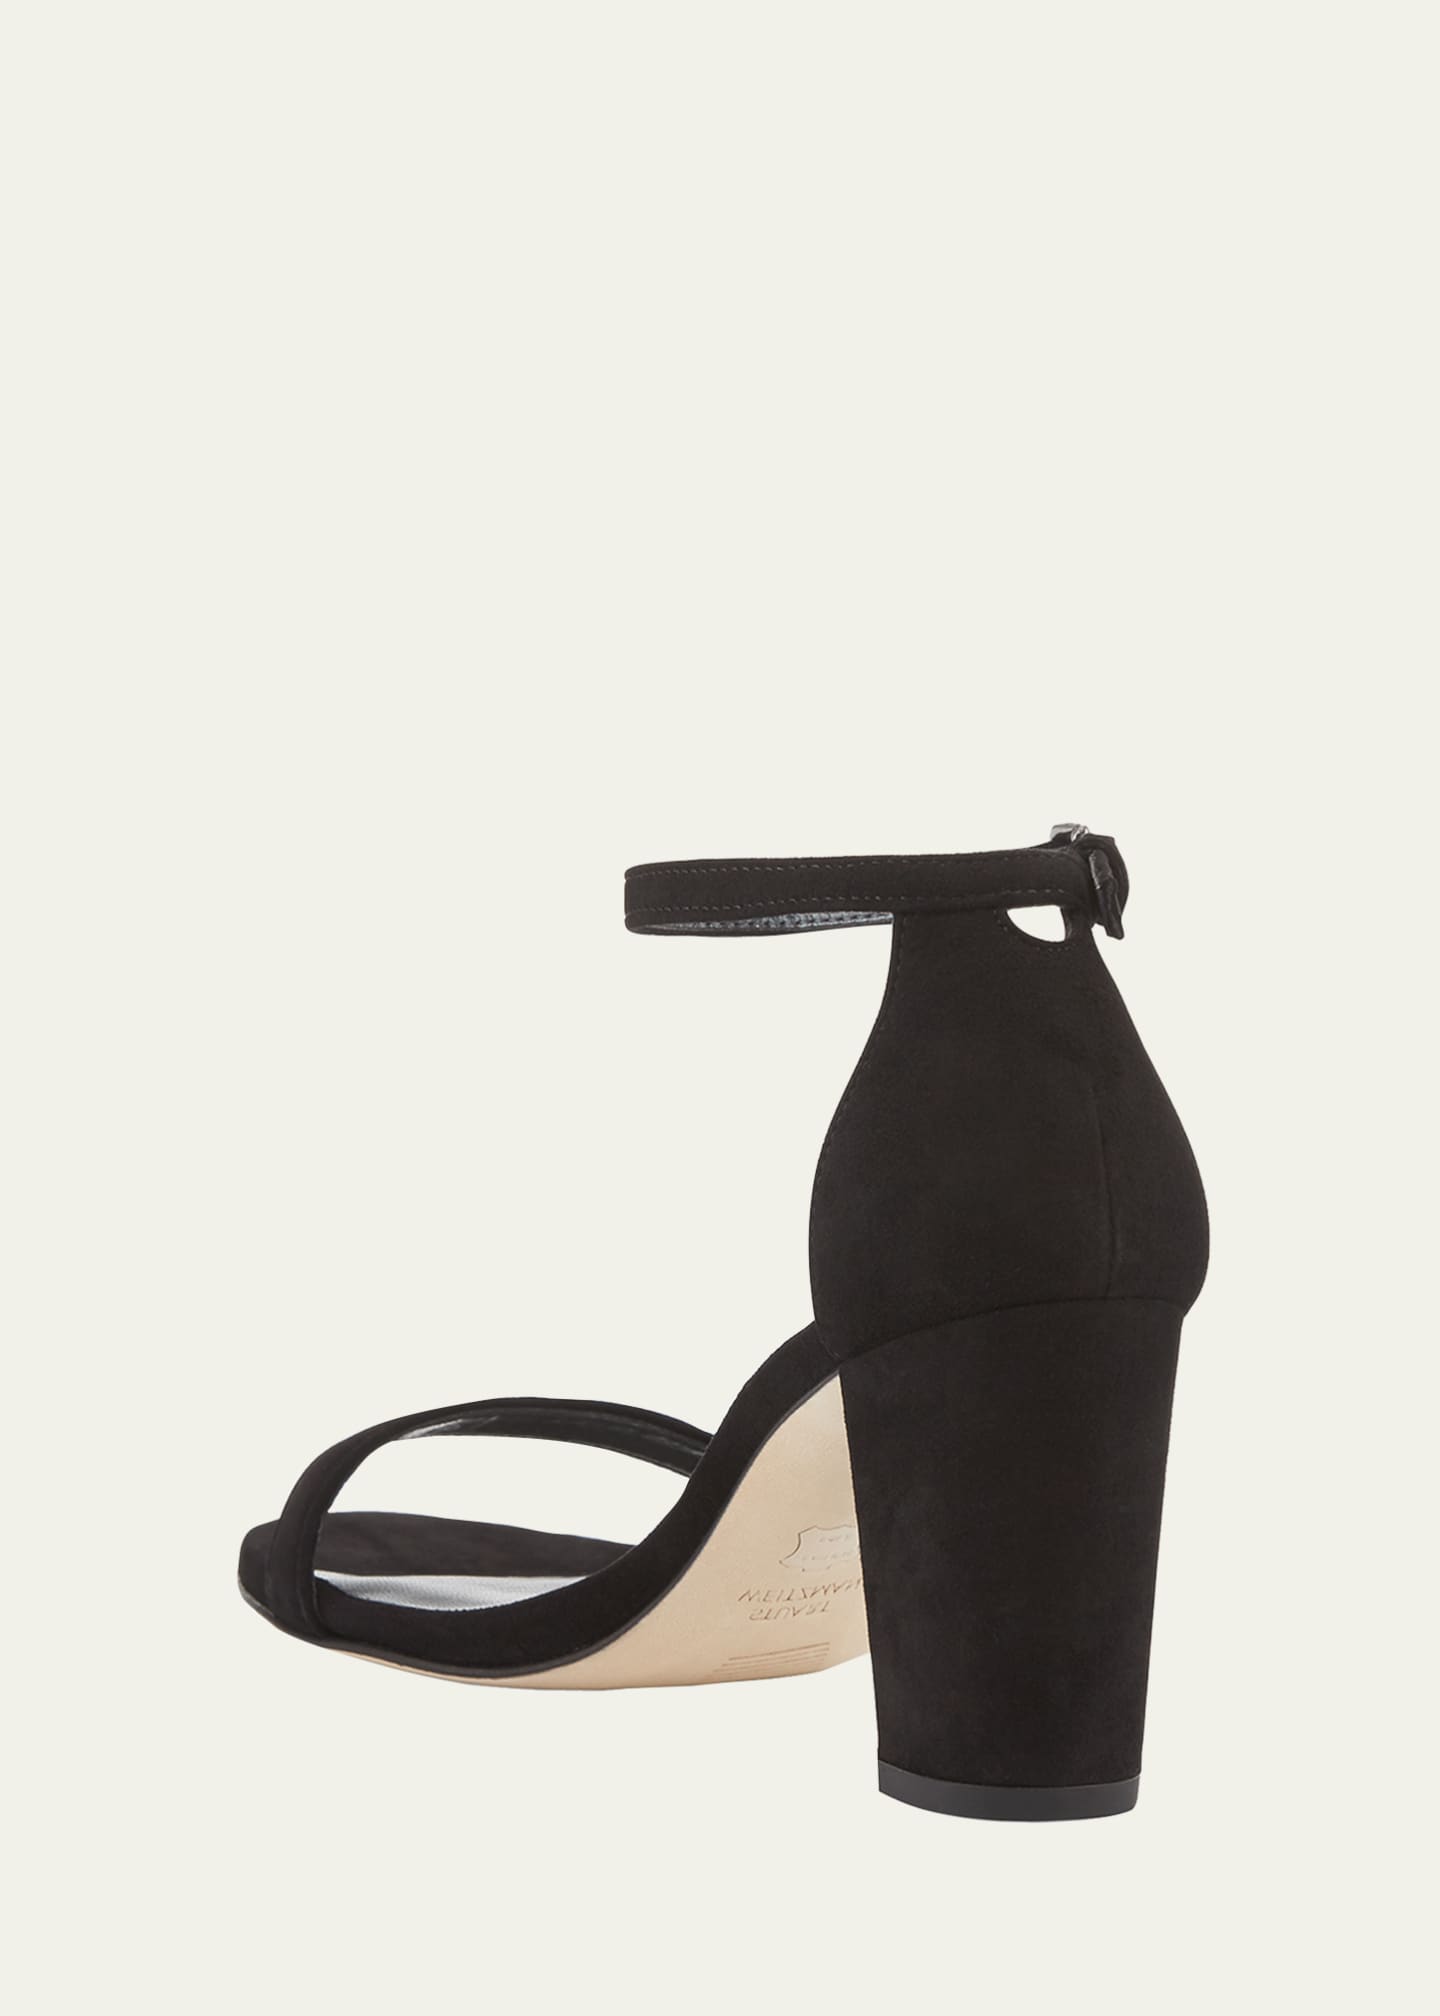 Stuart Weitzman Nearlynude Suede City Sandals Image 3 of 4